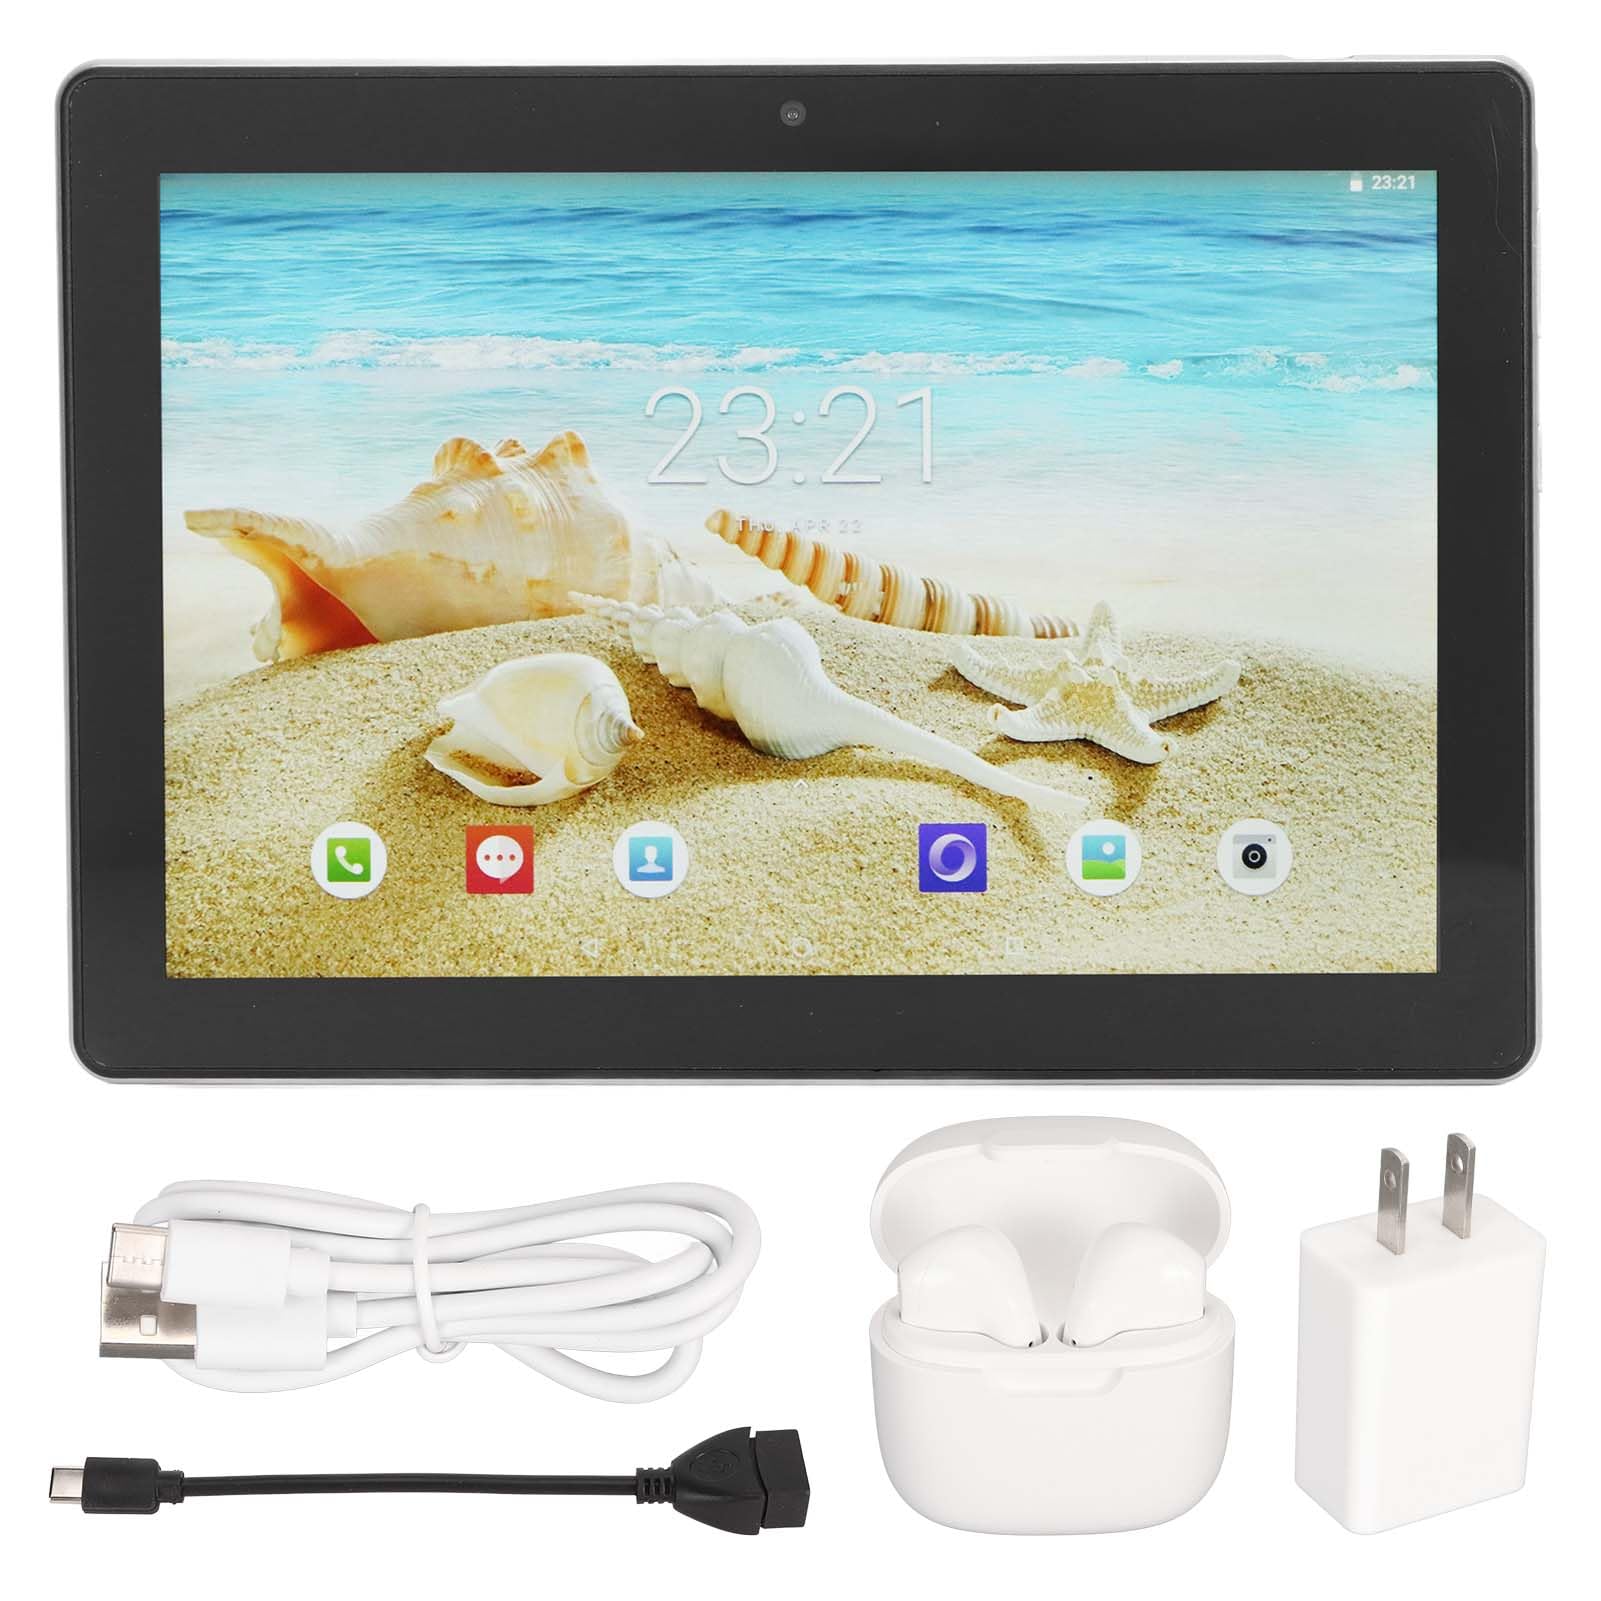 Gugxiom 4G LTE Tablet,Android 11 Tablet,8In IPS Hd Touchscreen,Octa Core Processor,with Dual Cameras,15 Days of Standby Time (US Plug)